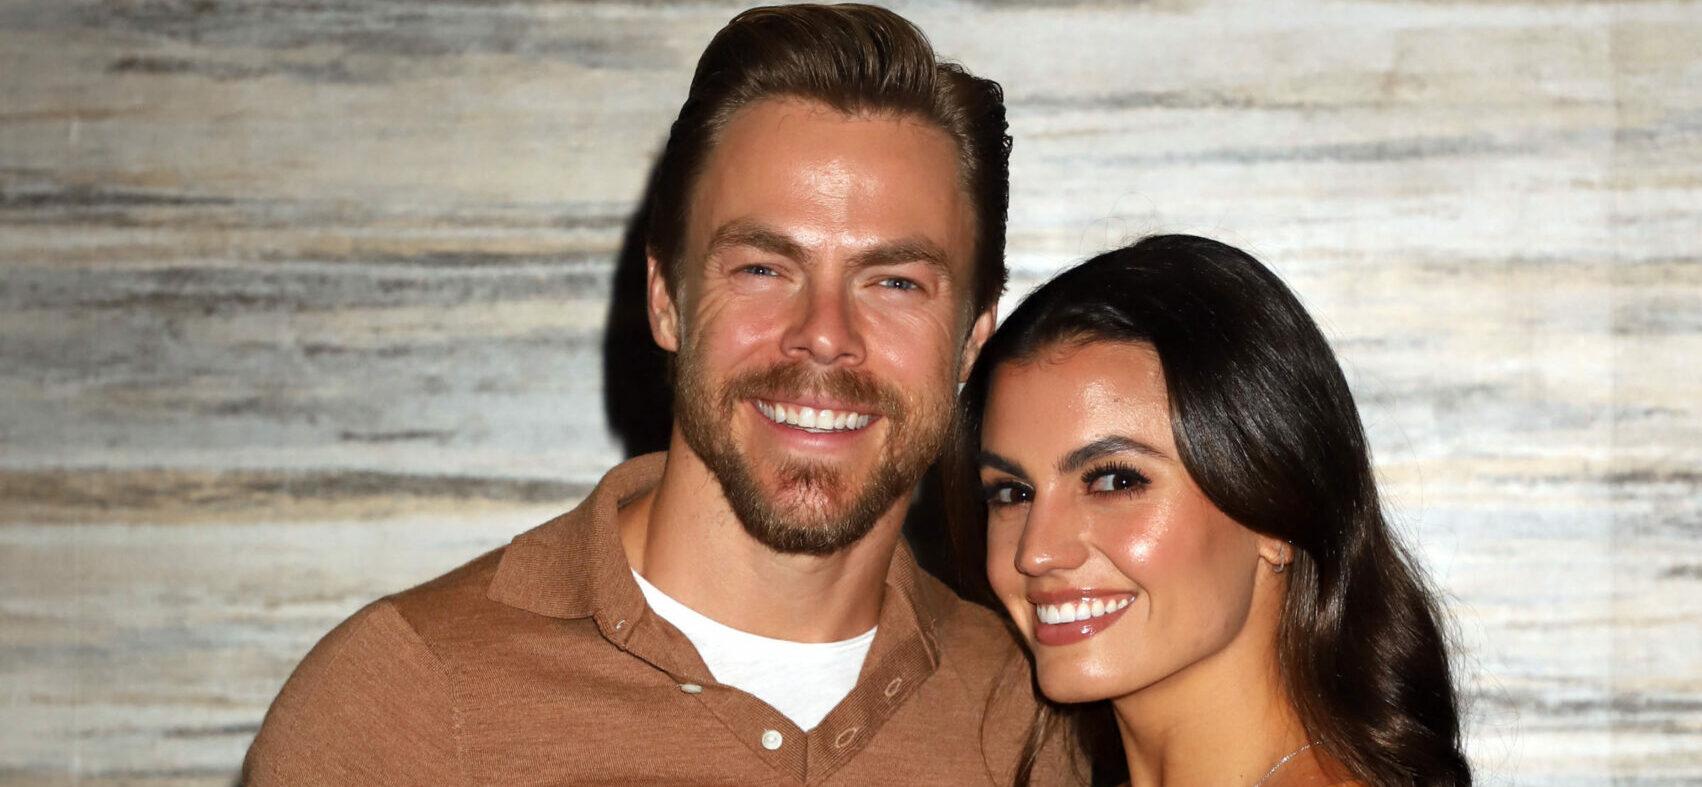 Derek Hough Is ‘In Awe’ Of Wife’s Strength Following Skull Surgery